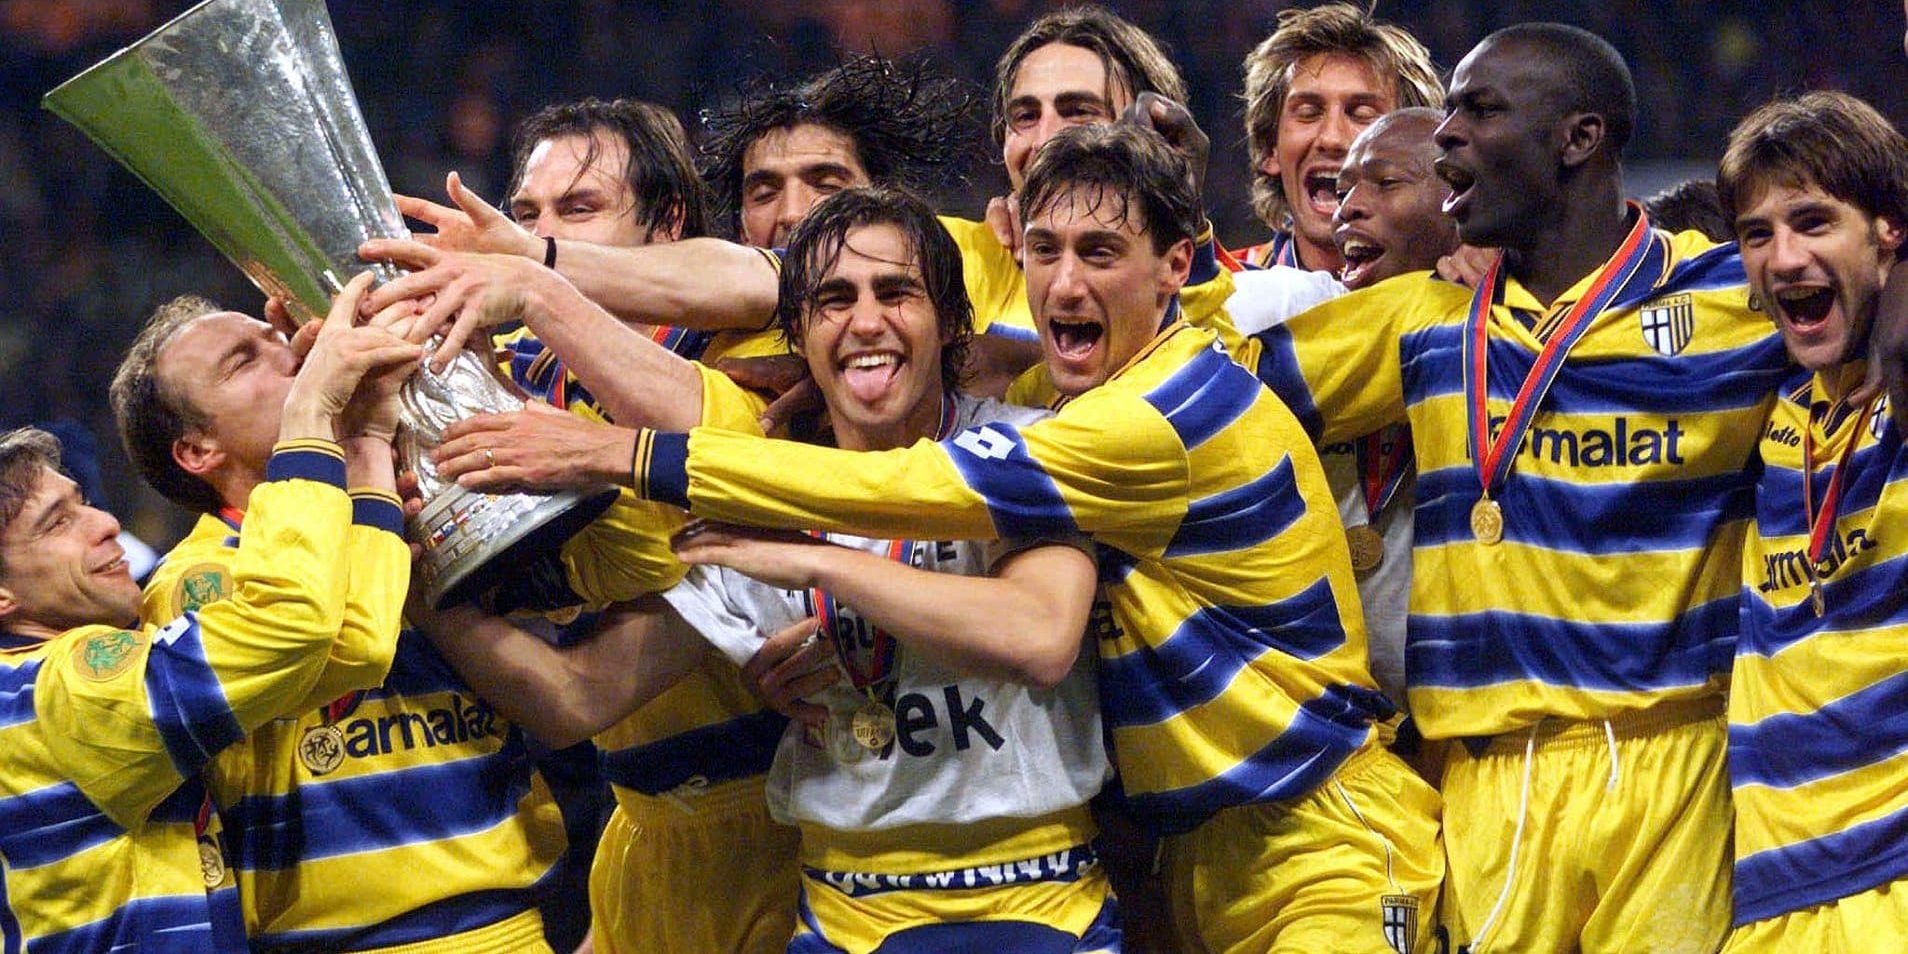 MOS84D:SPORT-SOCCER:MOSCOW,12MAY99 - Parma of Italy players selebrates with the UEFA Cup  after they defeated Olimic Marseille in Moscow, May 12. The match ended 3-0.   kyl/Photo by Alexander Demianchuk REUTERS